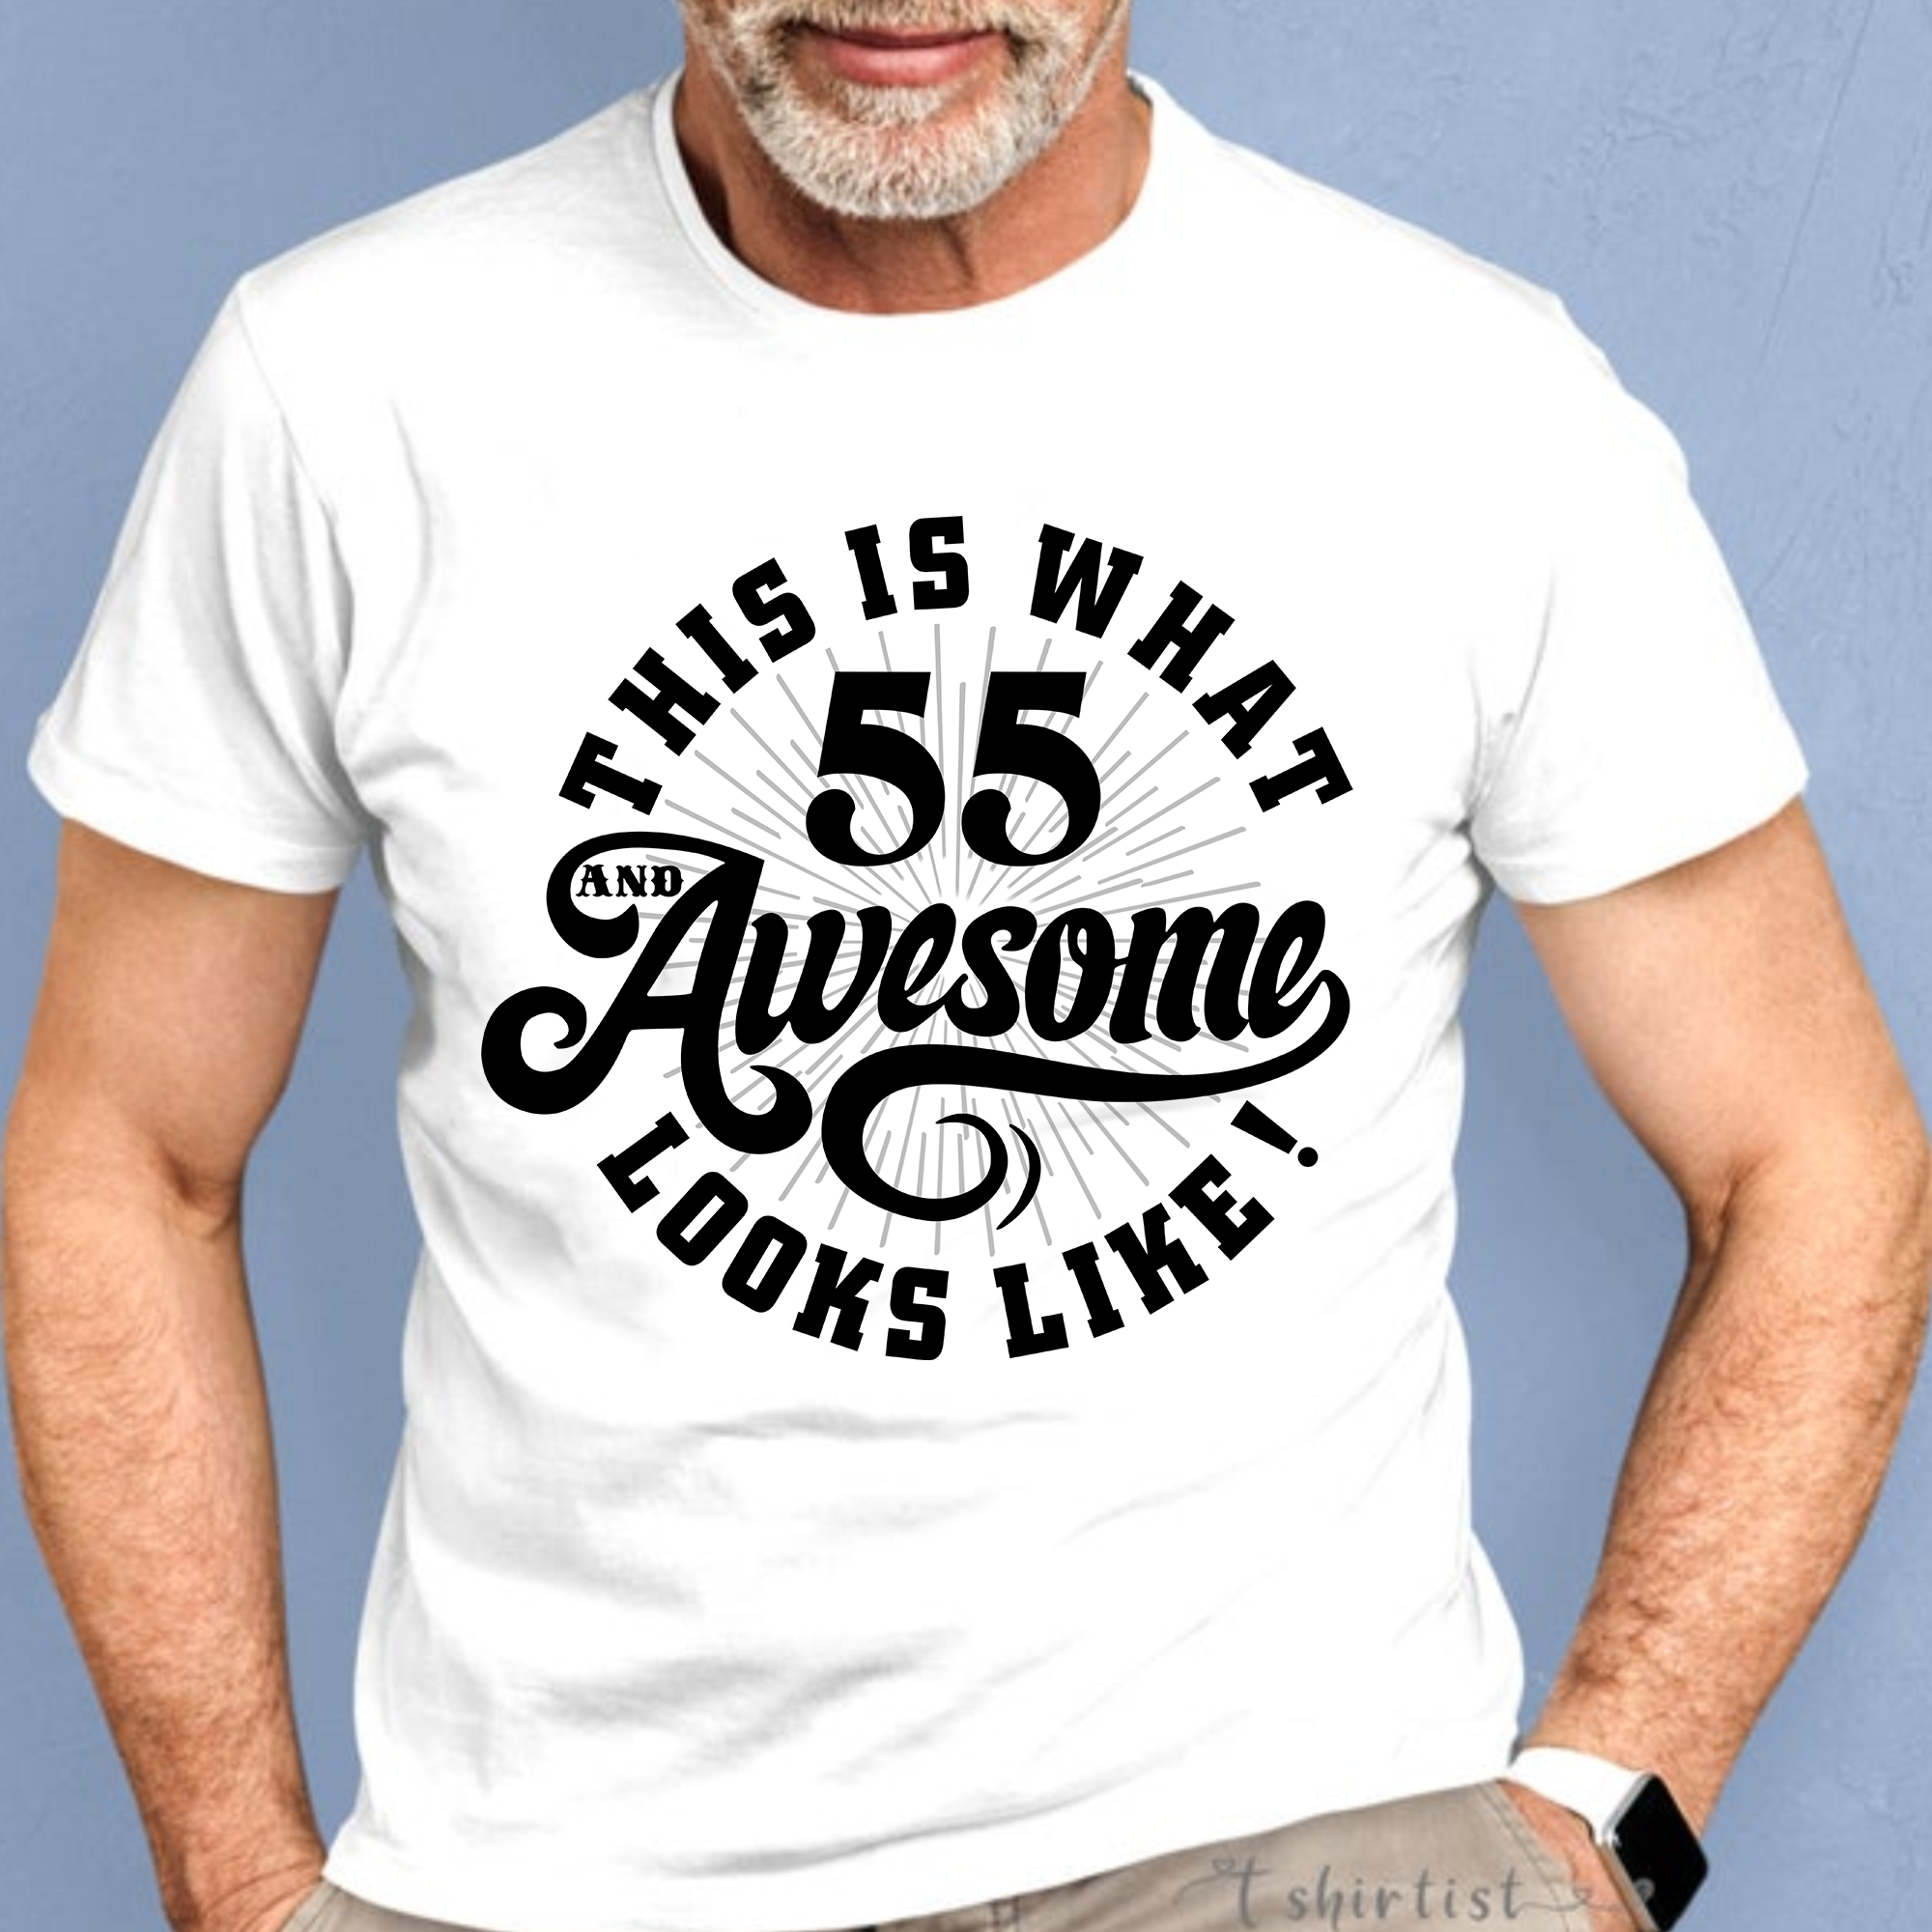 This Is What 55 Awesome Looks Like – Happy 55th Birthday Shirt